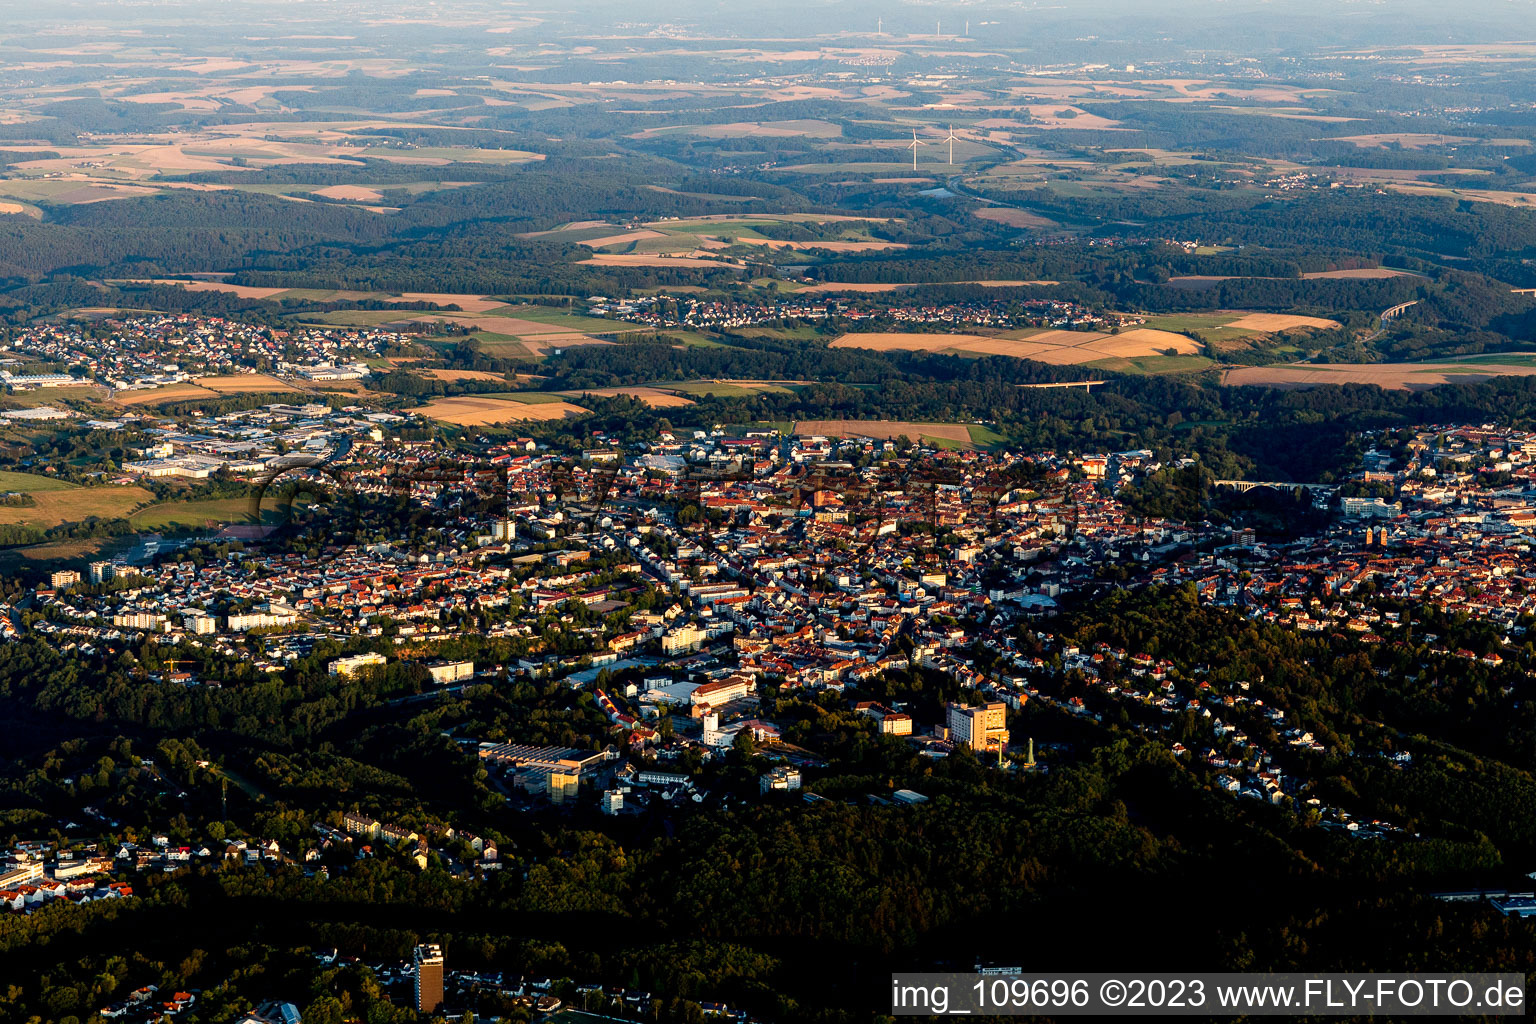 Pirmasens in the state Rhineland-Palatinate, Germany from the plane